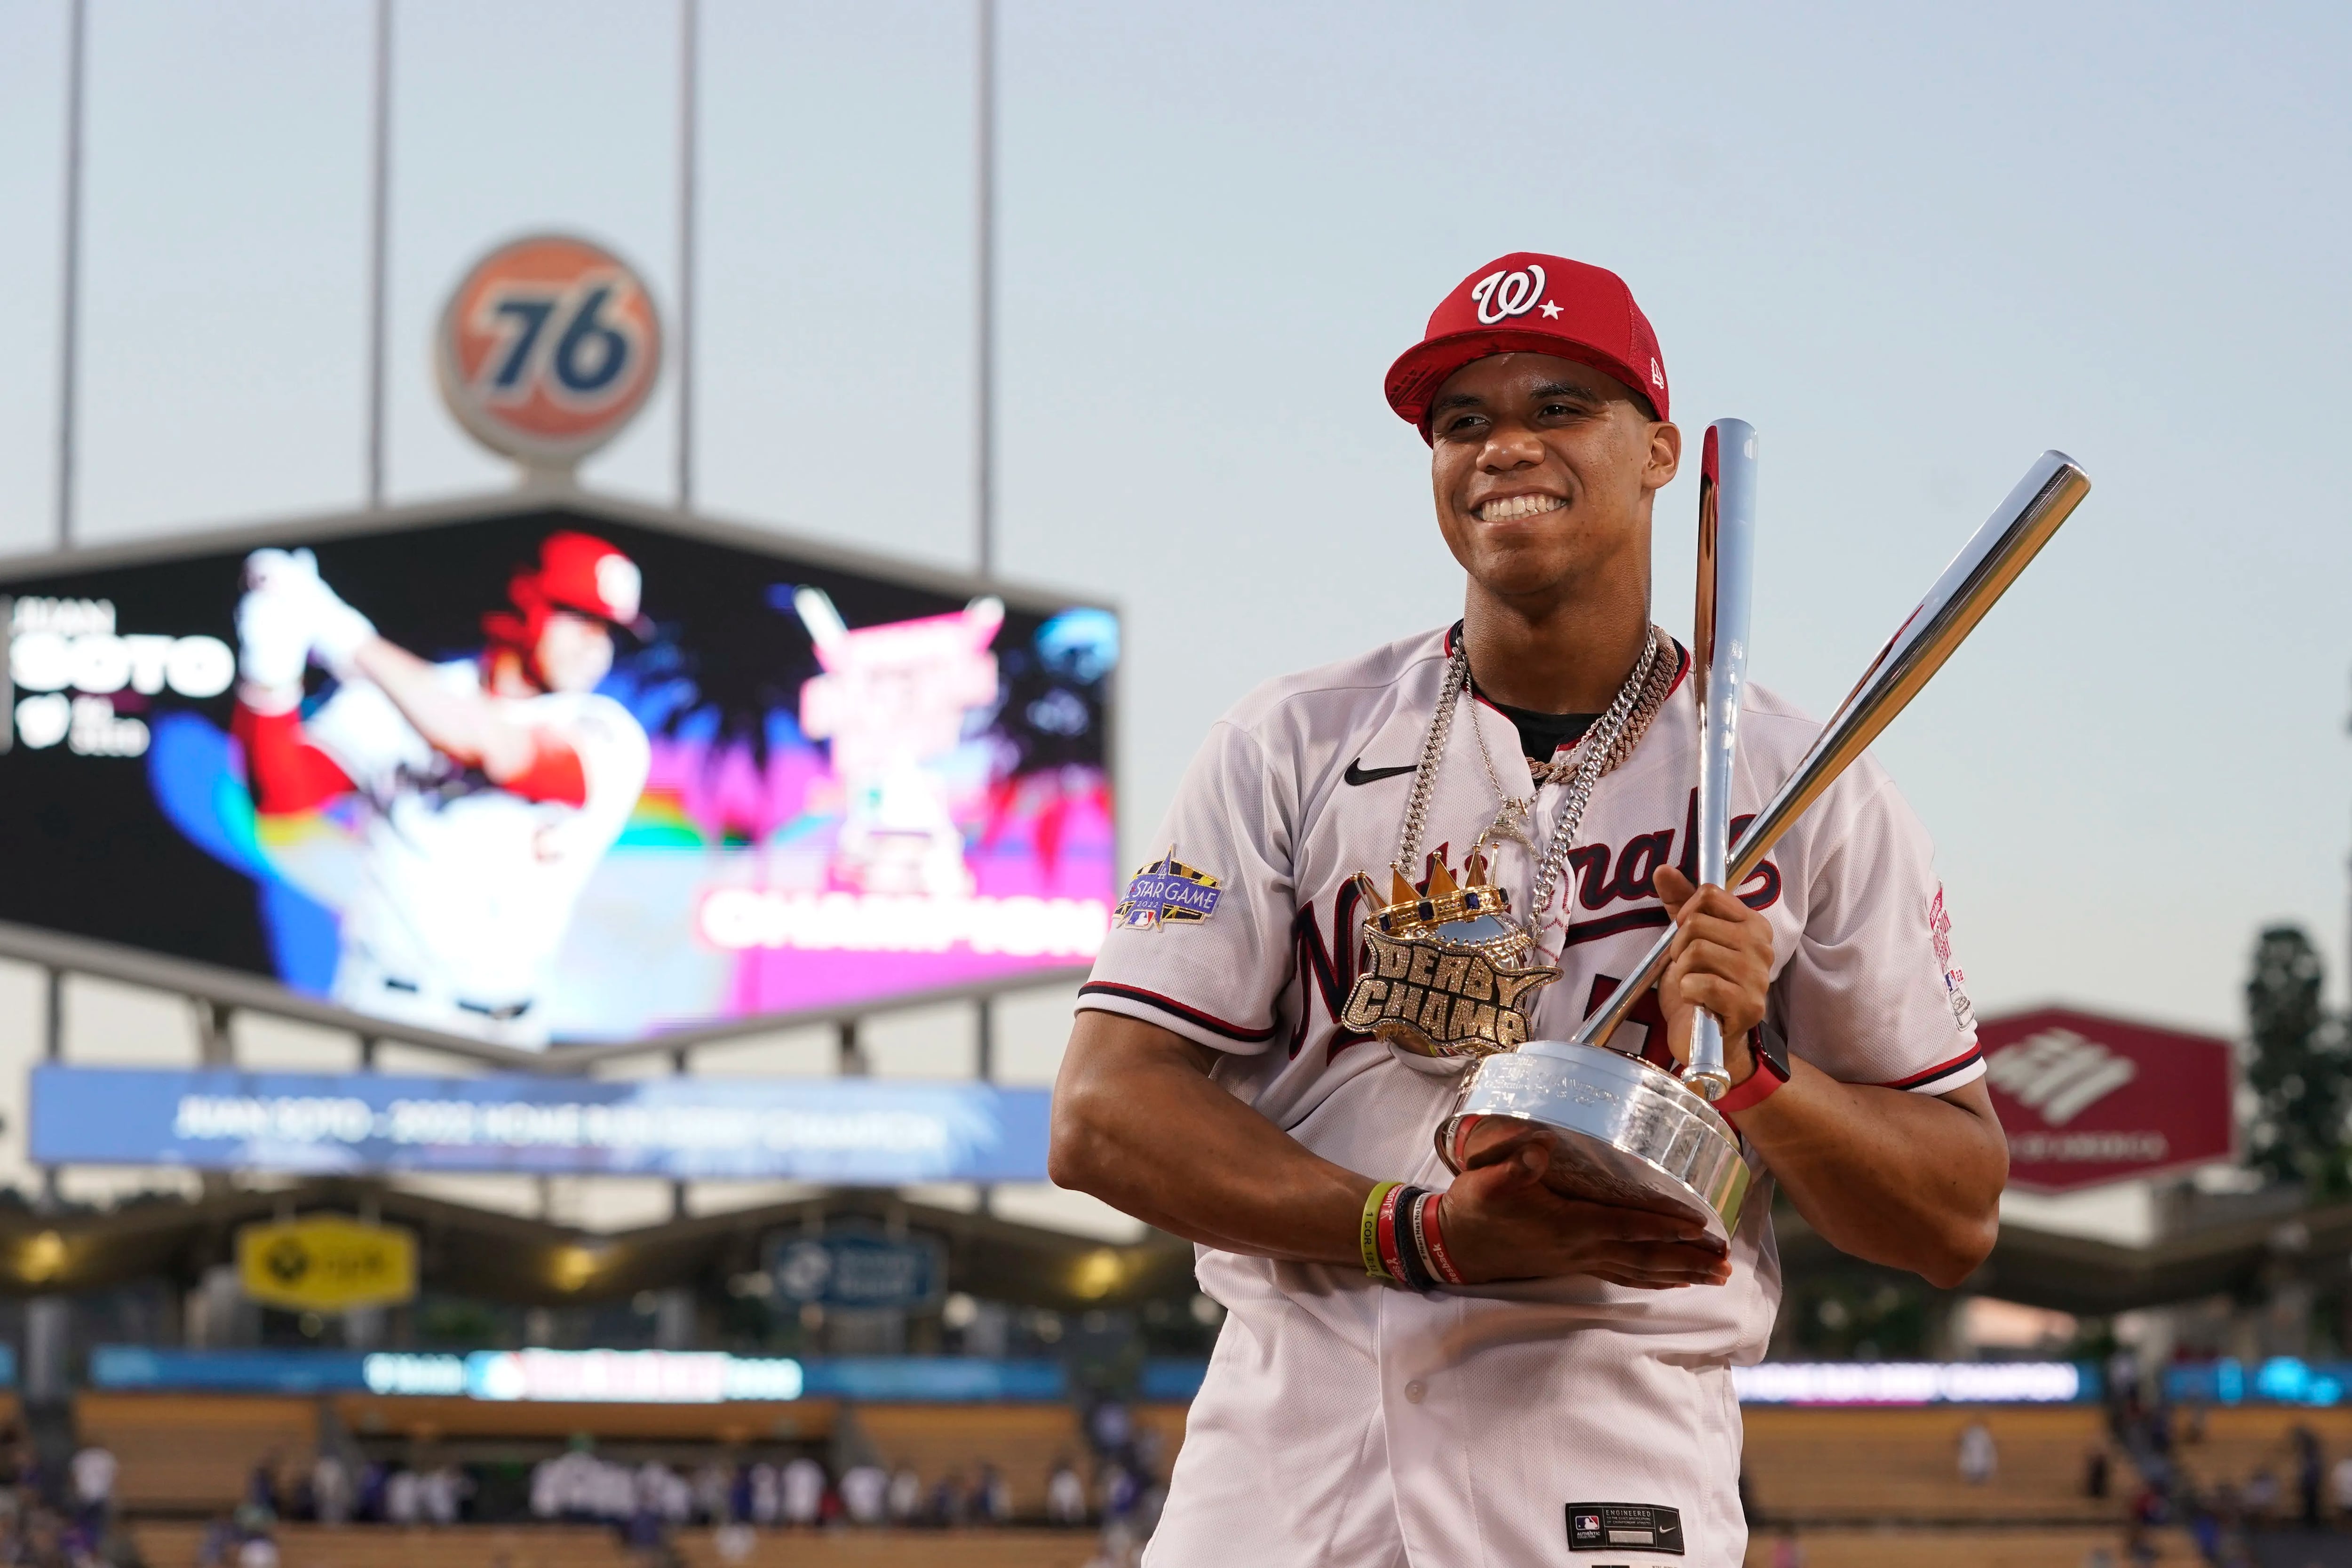 Home Run Derby: Start time, participants, bracket, how to watch and stream